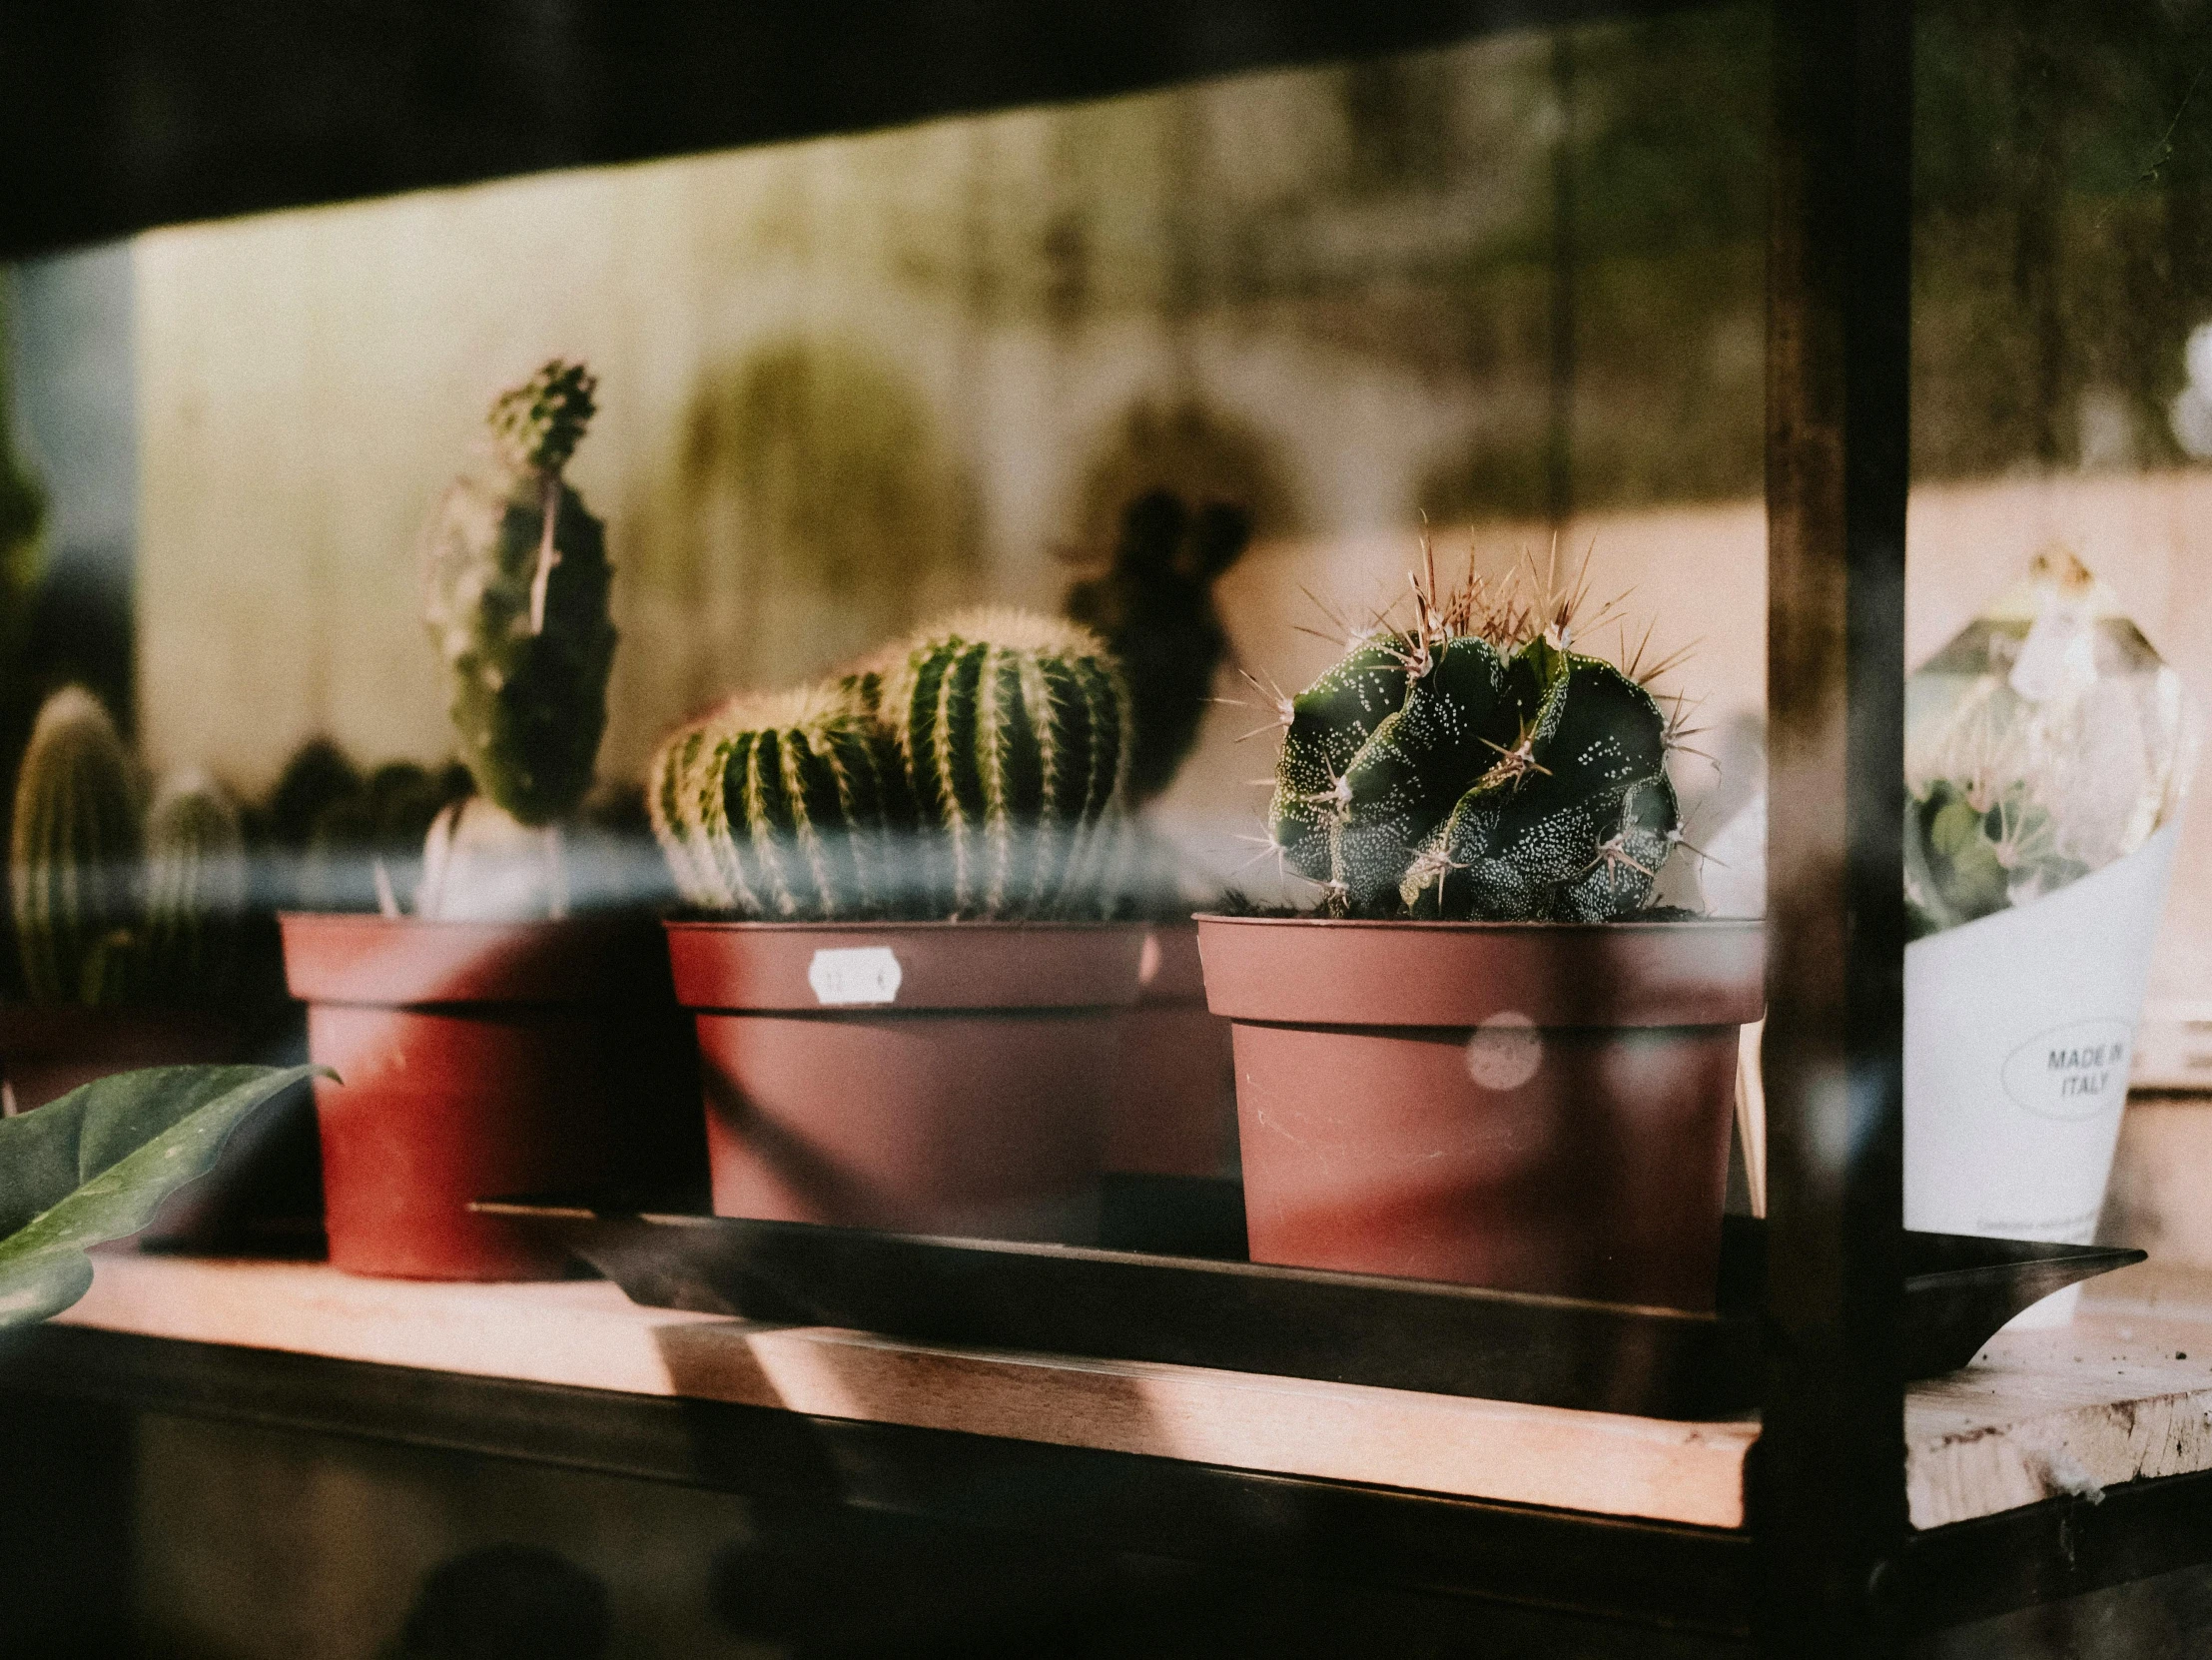 cactuses on display in some flower pots in a window